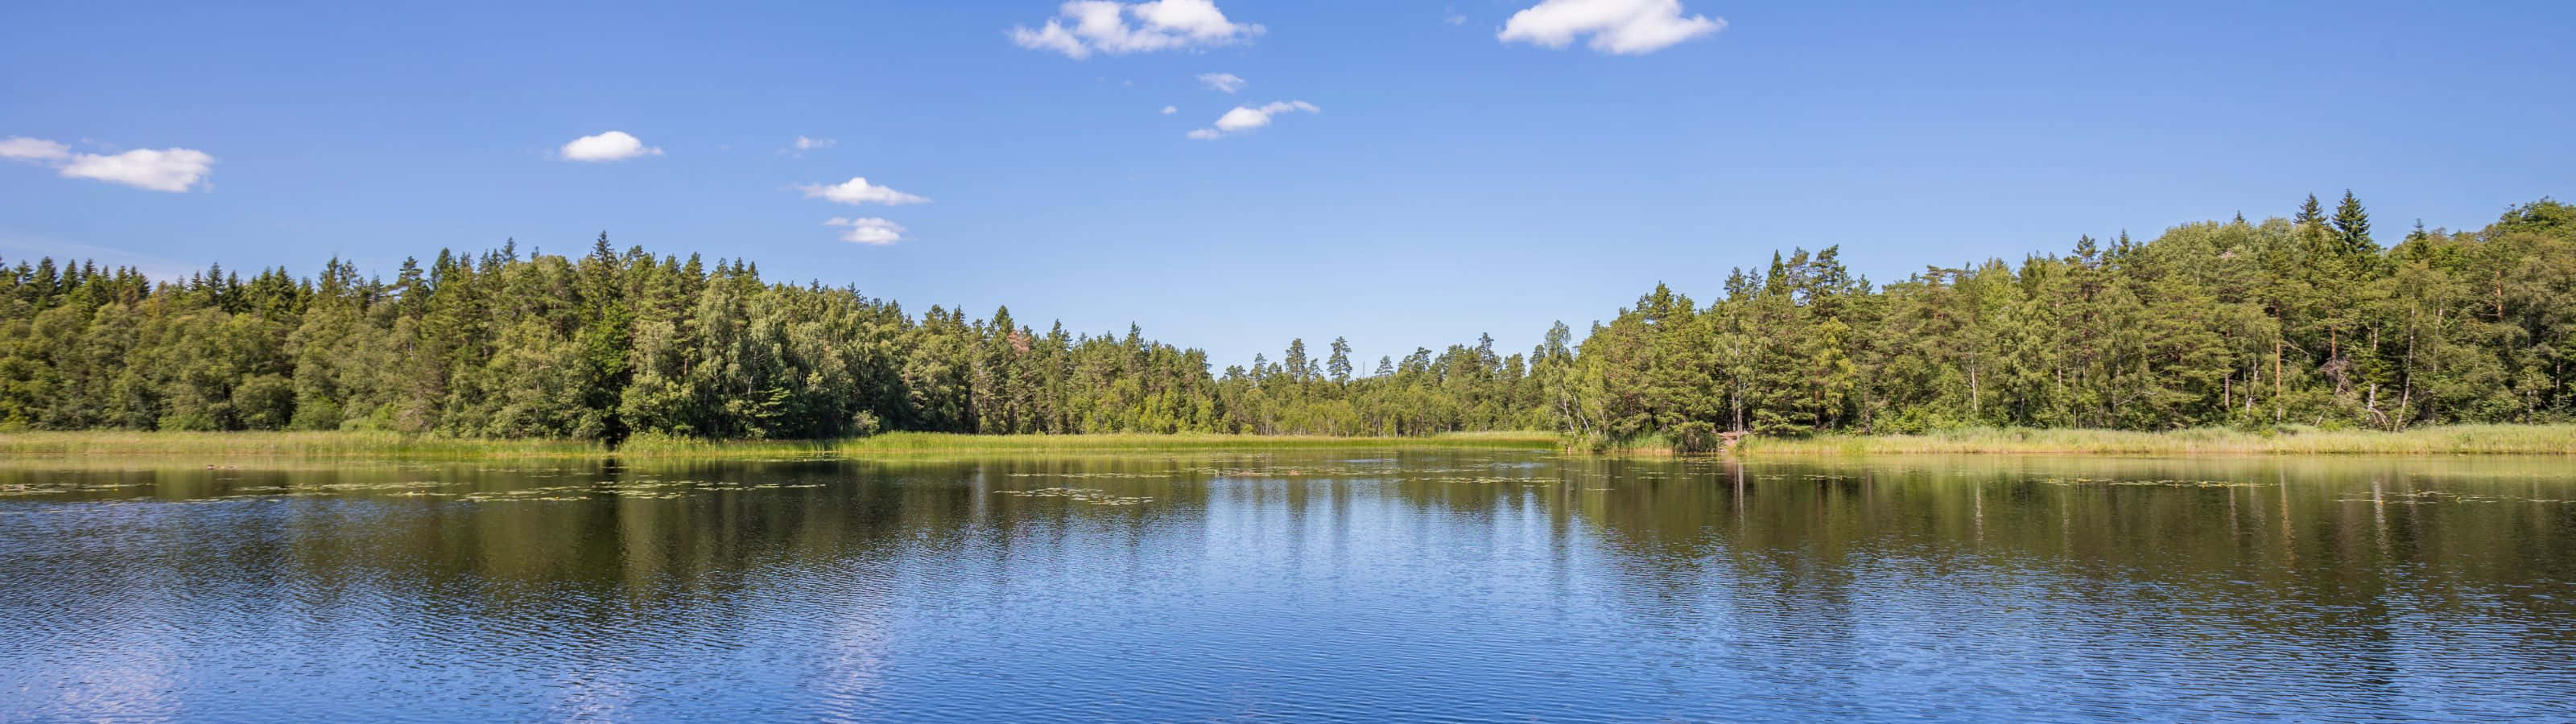 A Lake Surrounded By Trees And A Blue Sky Background